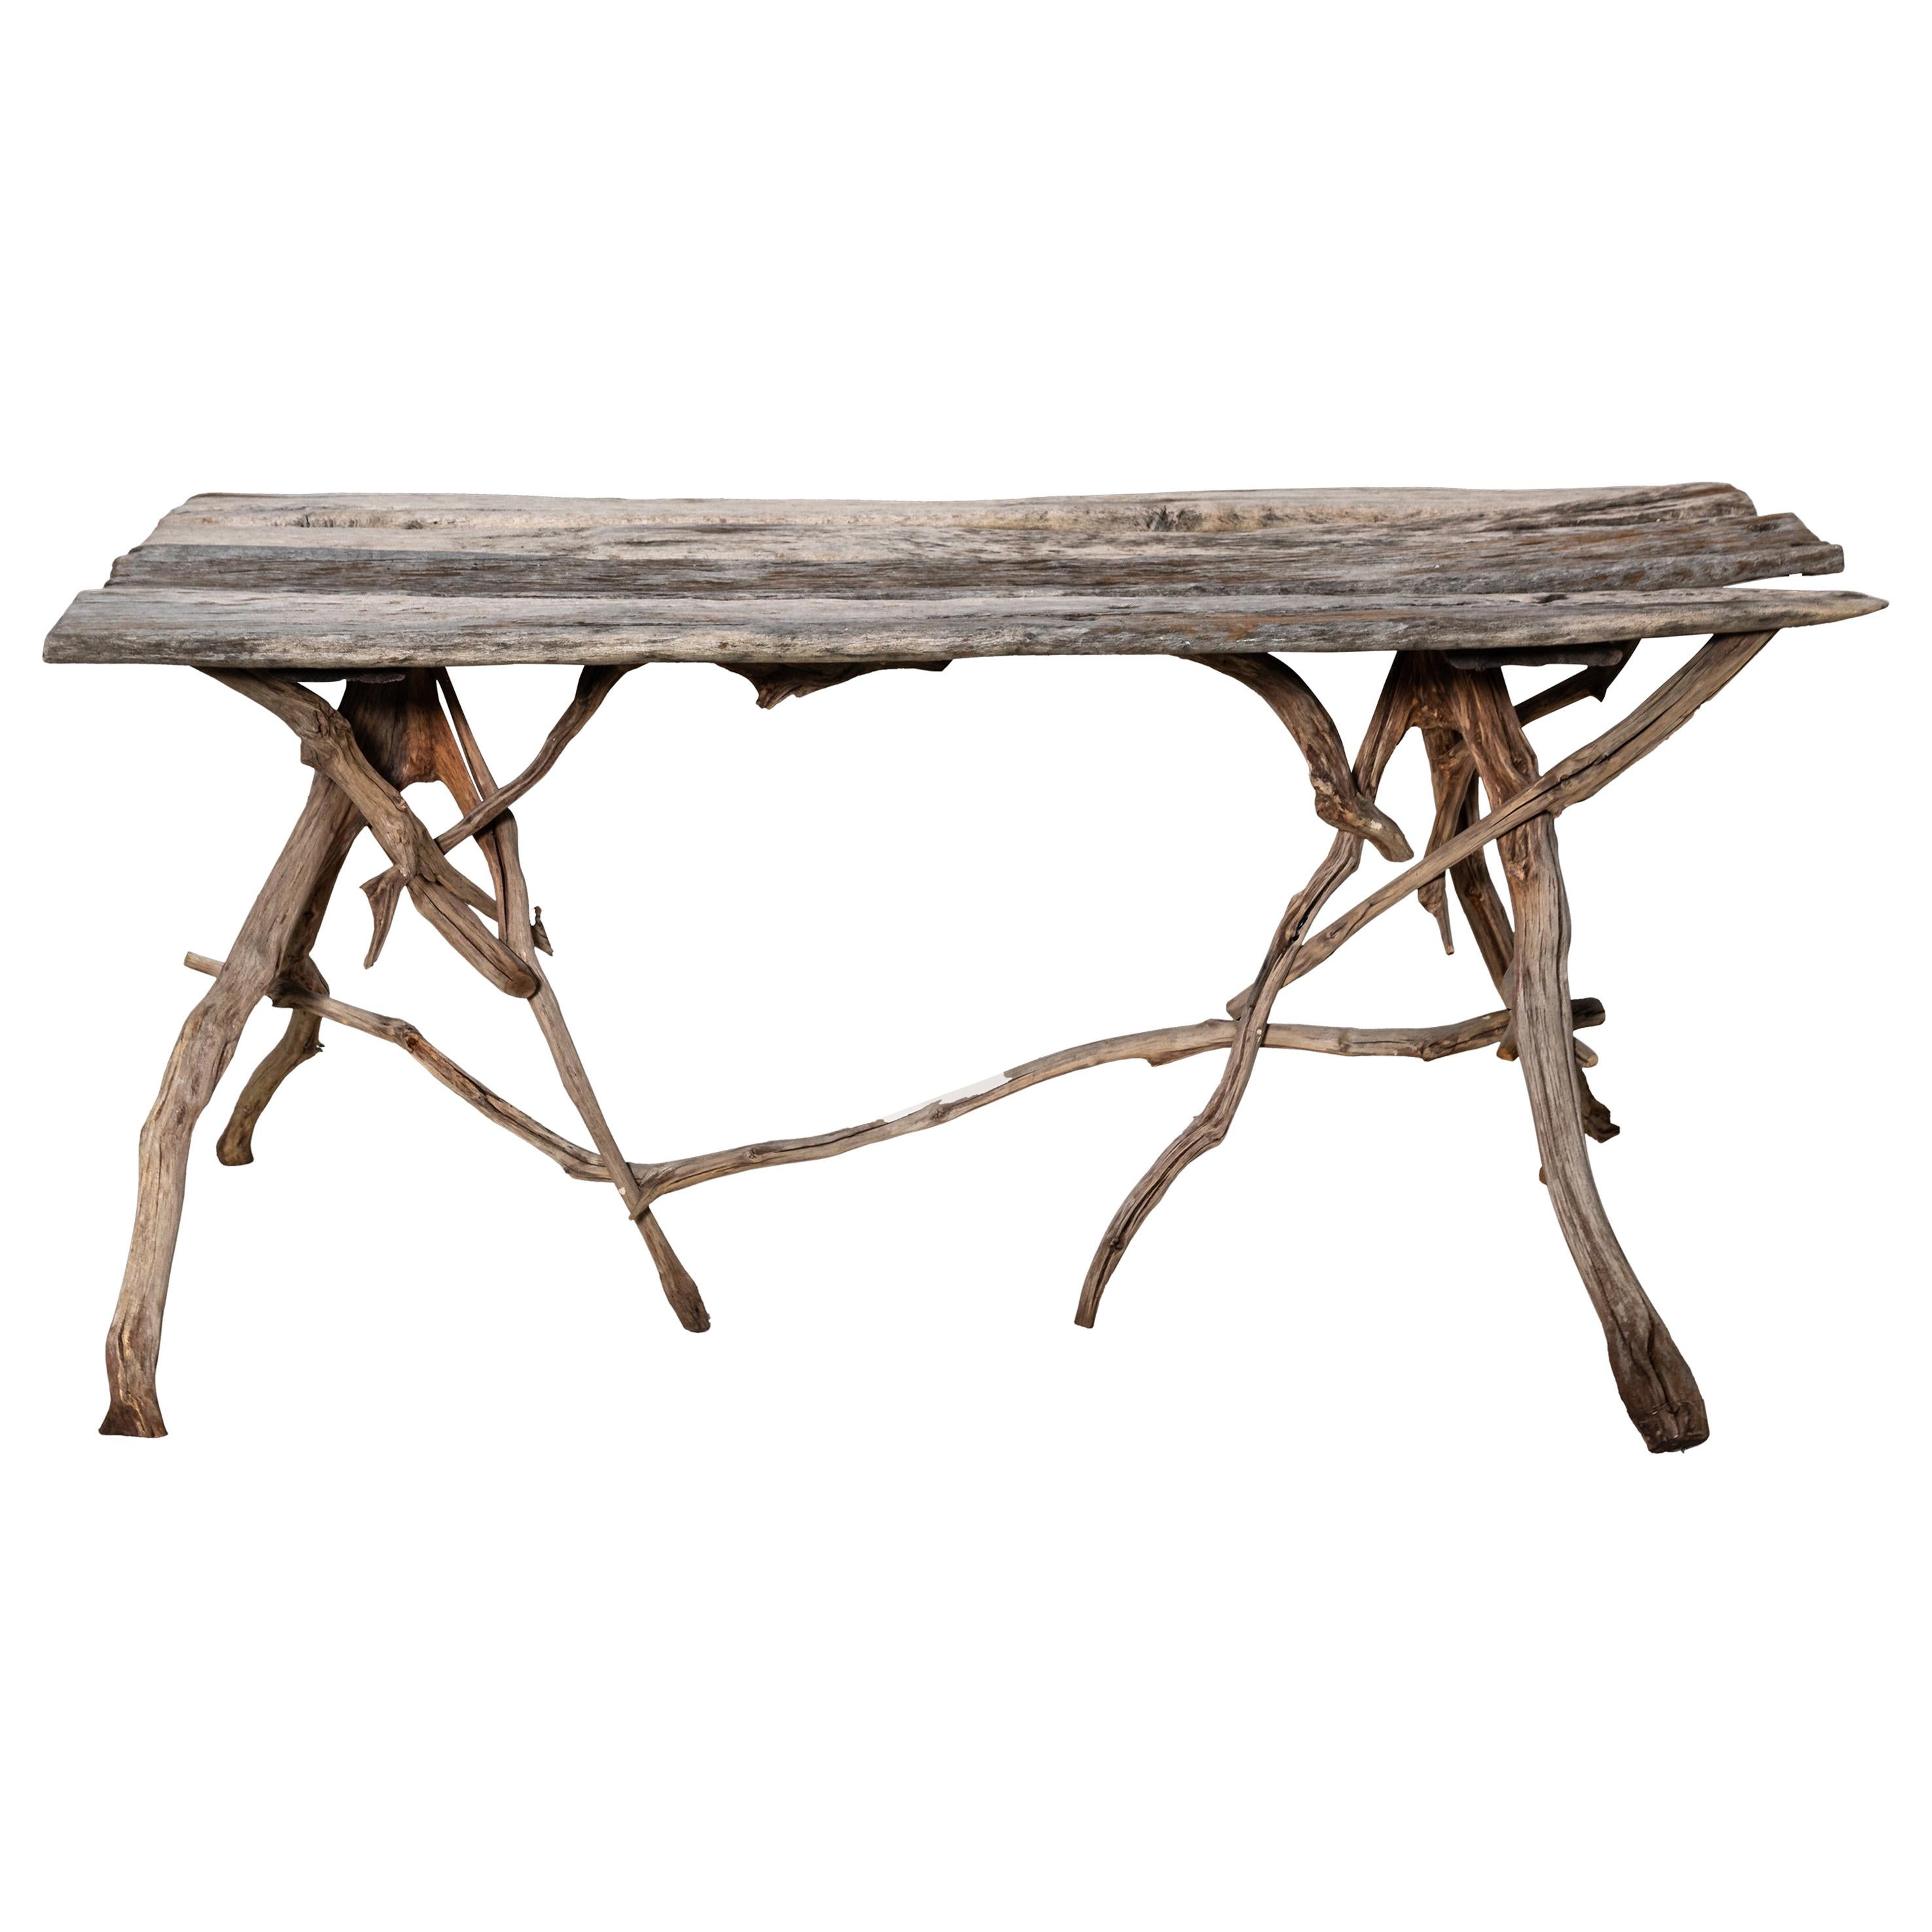 English Country Reclaimed Driftwood Garden Table